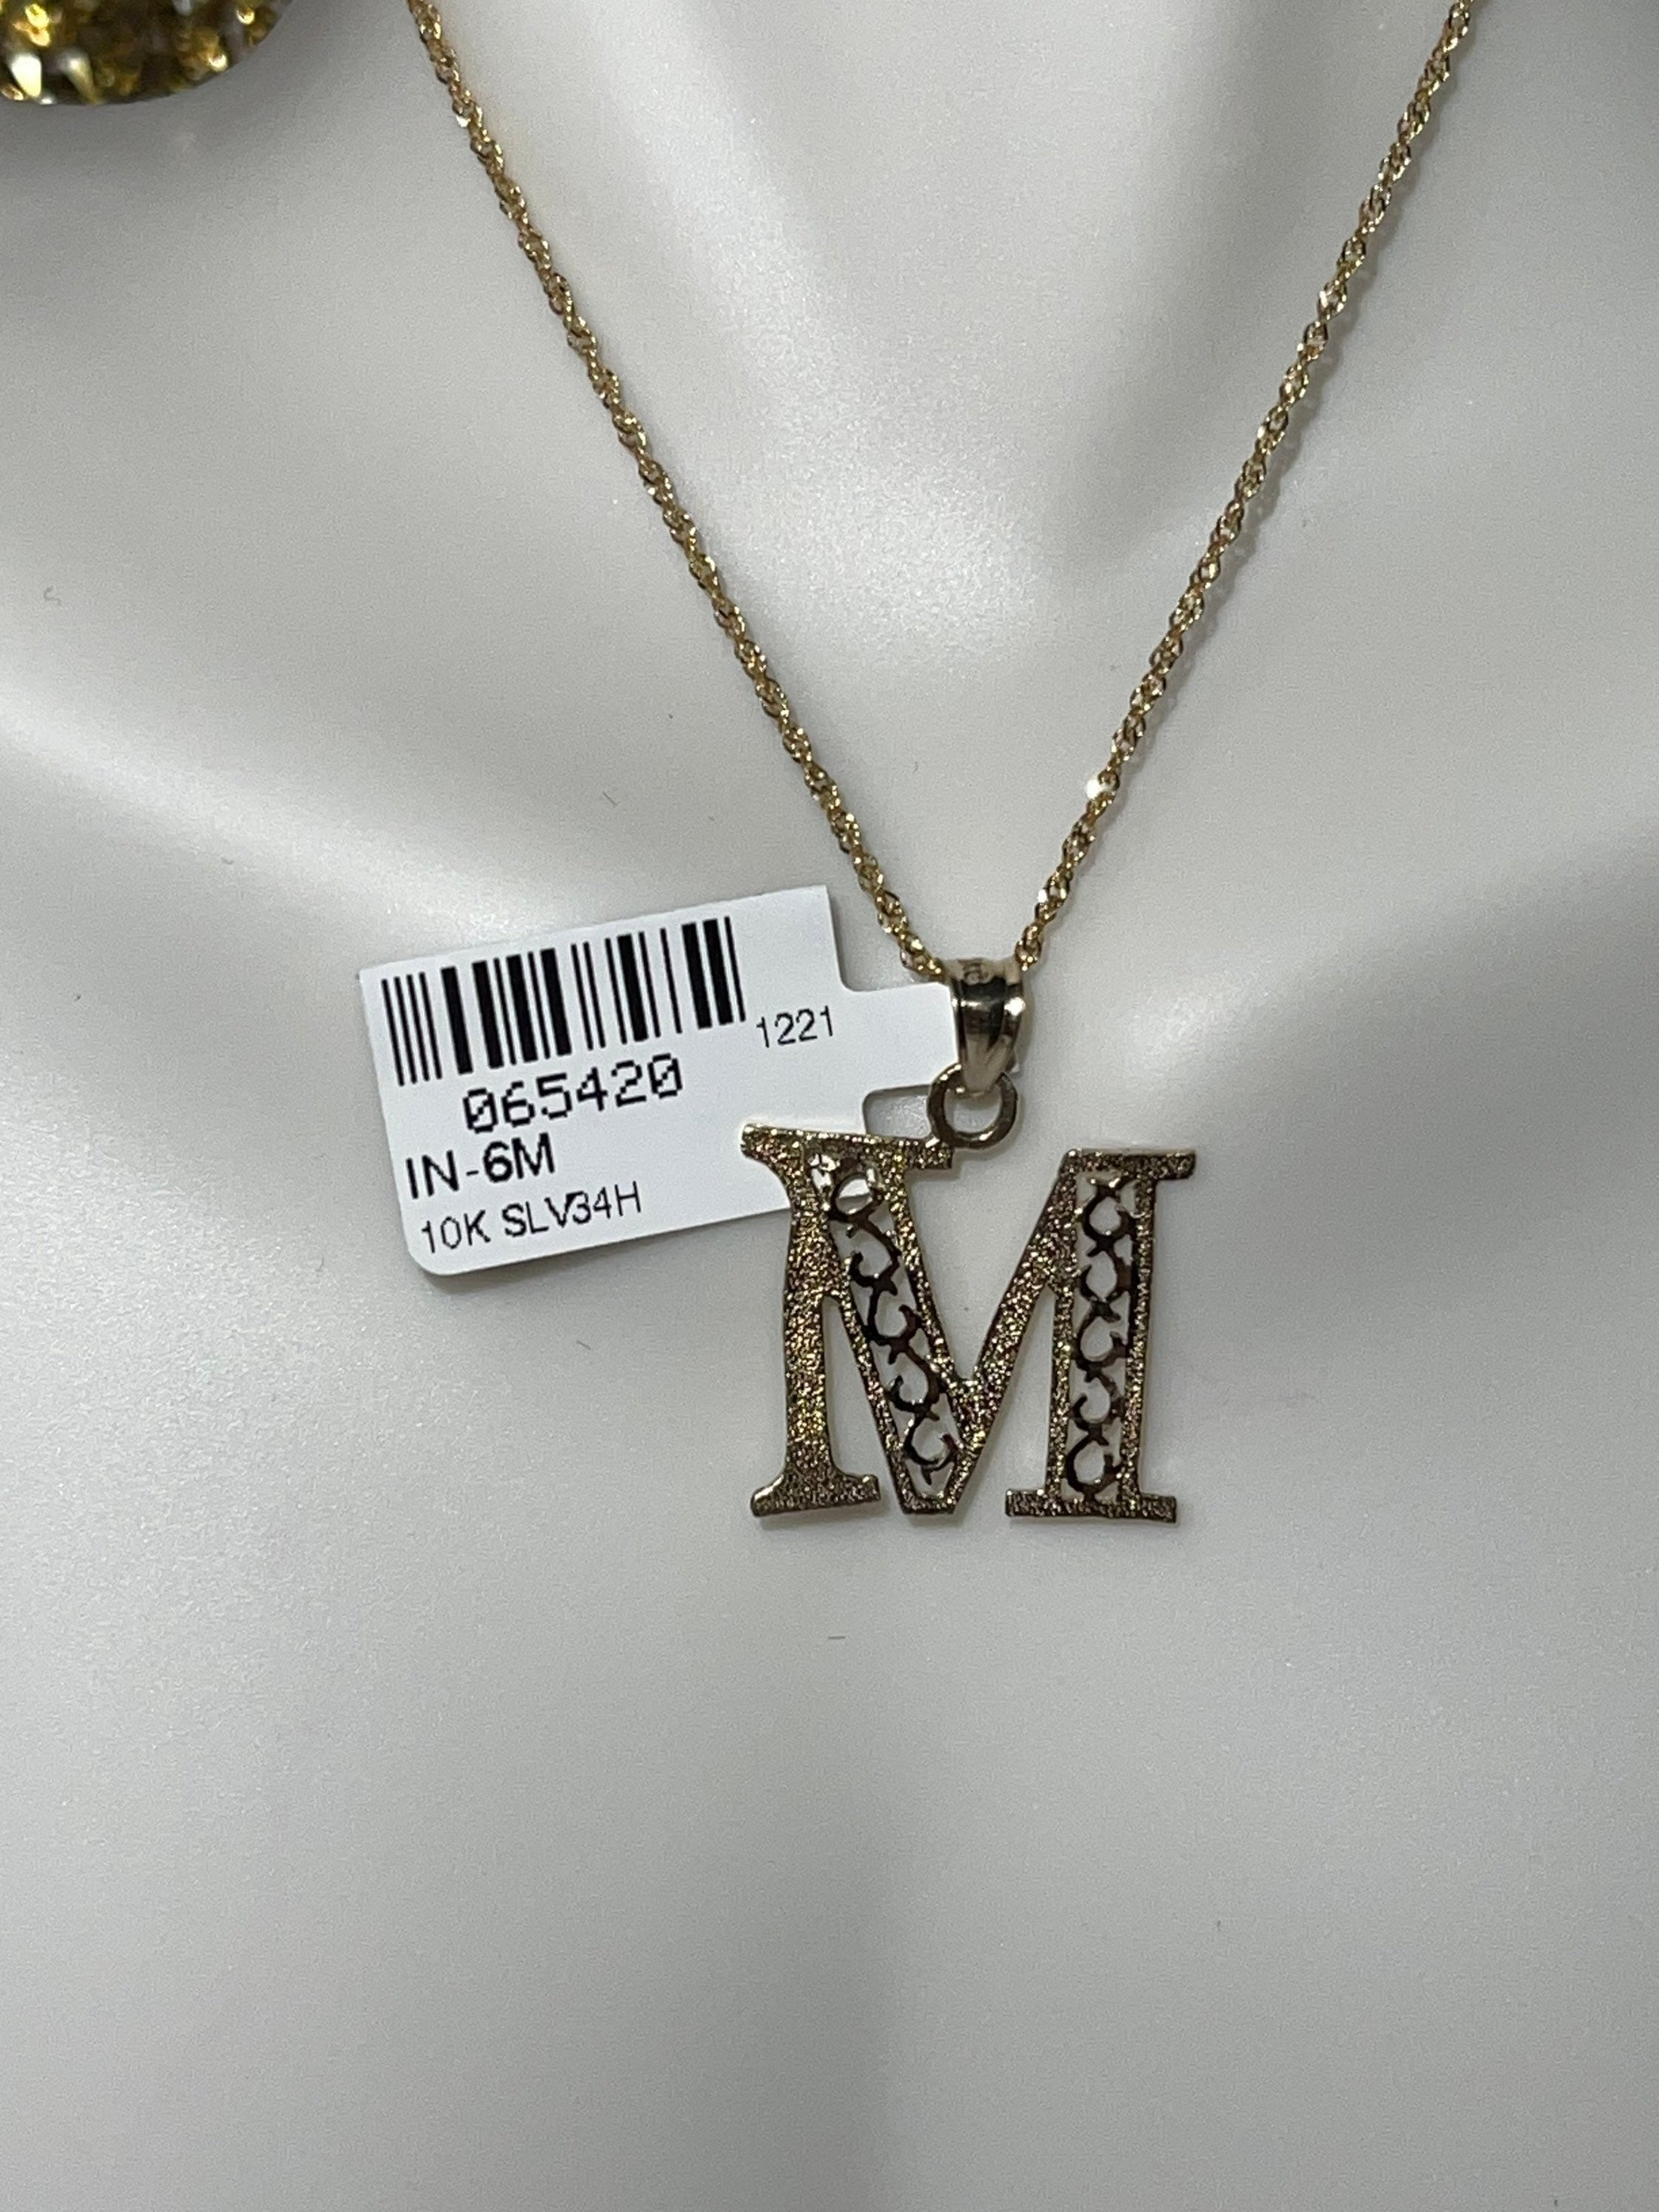 10k solid gold, diamond cut Gold Initial letter pendant, gift for Dad, gift for mom, all letters available, holiday, NOT plated HOT